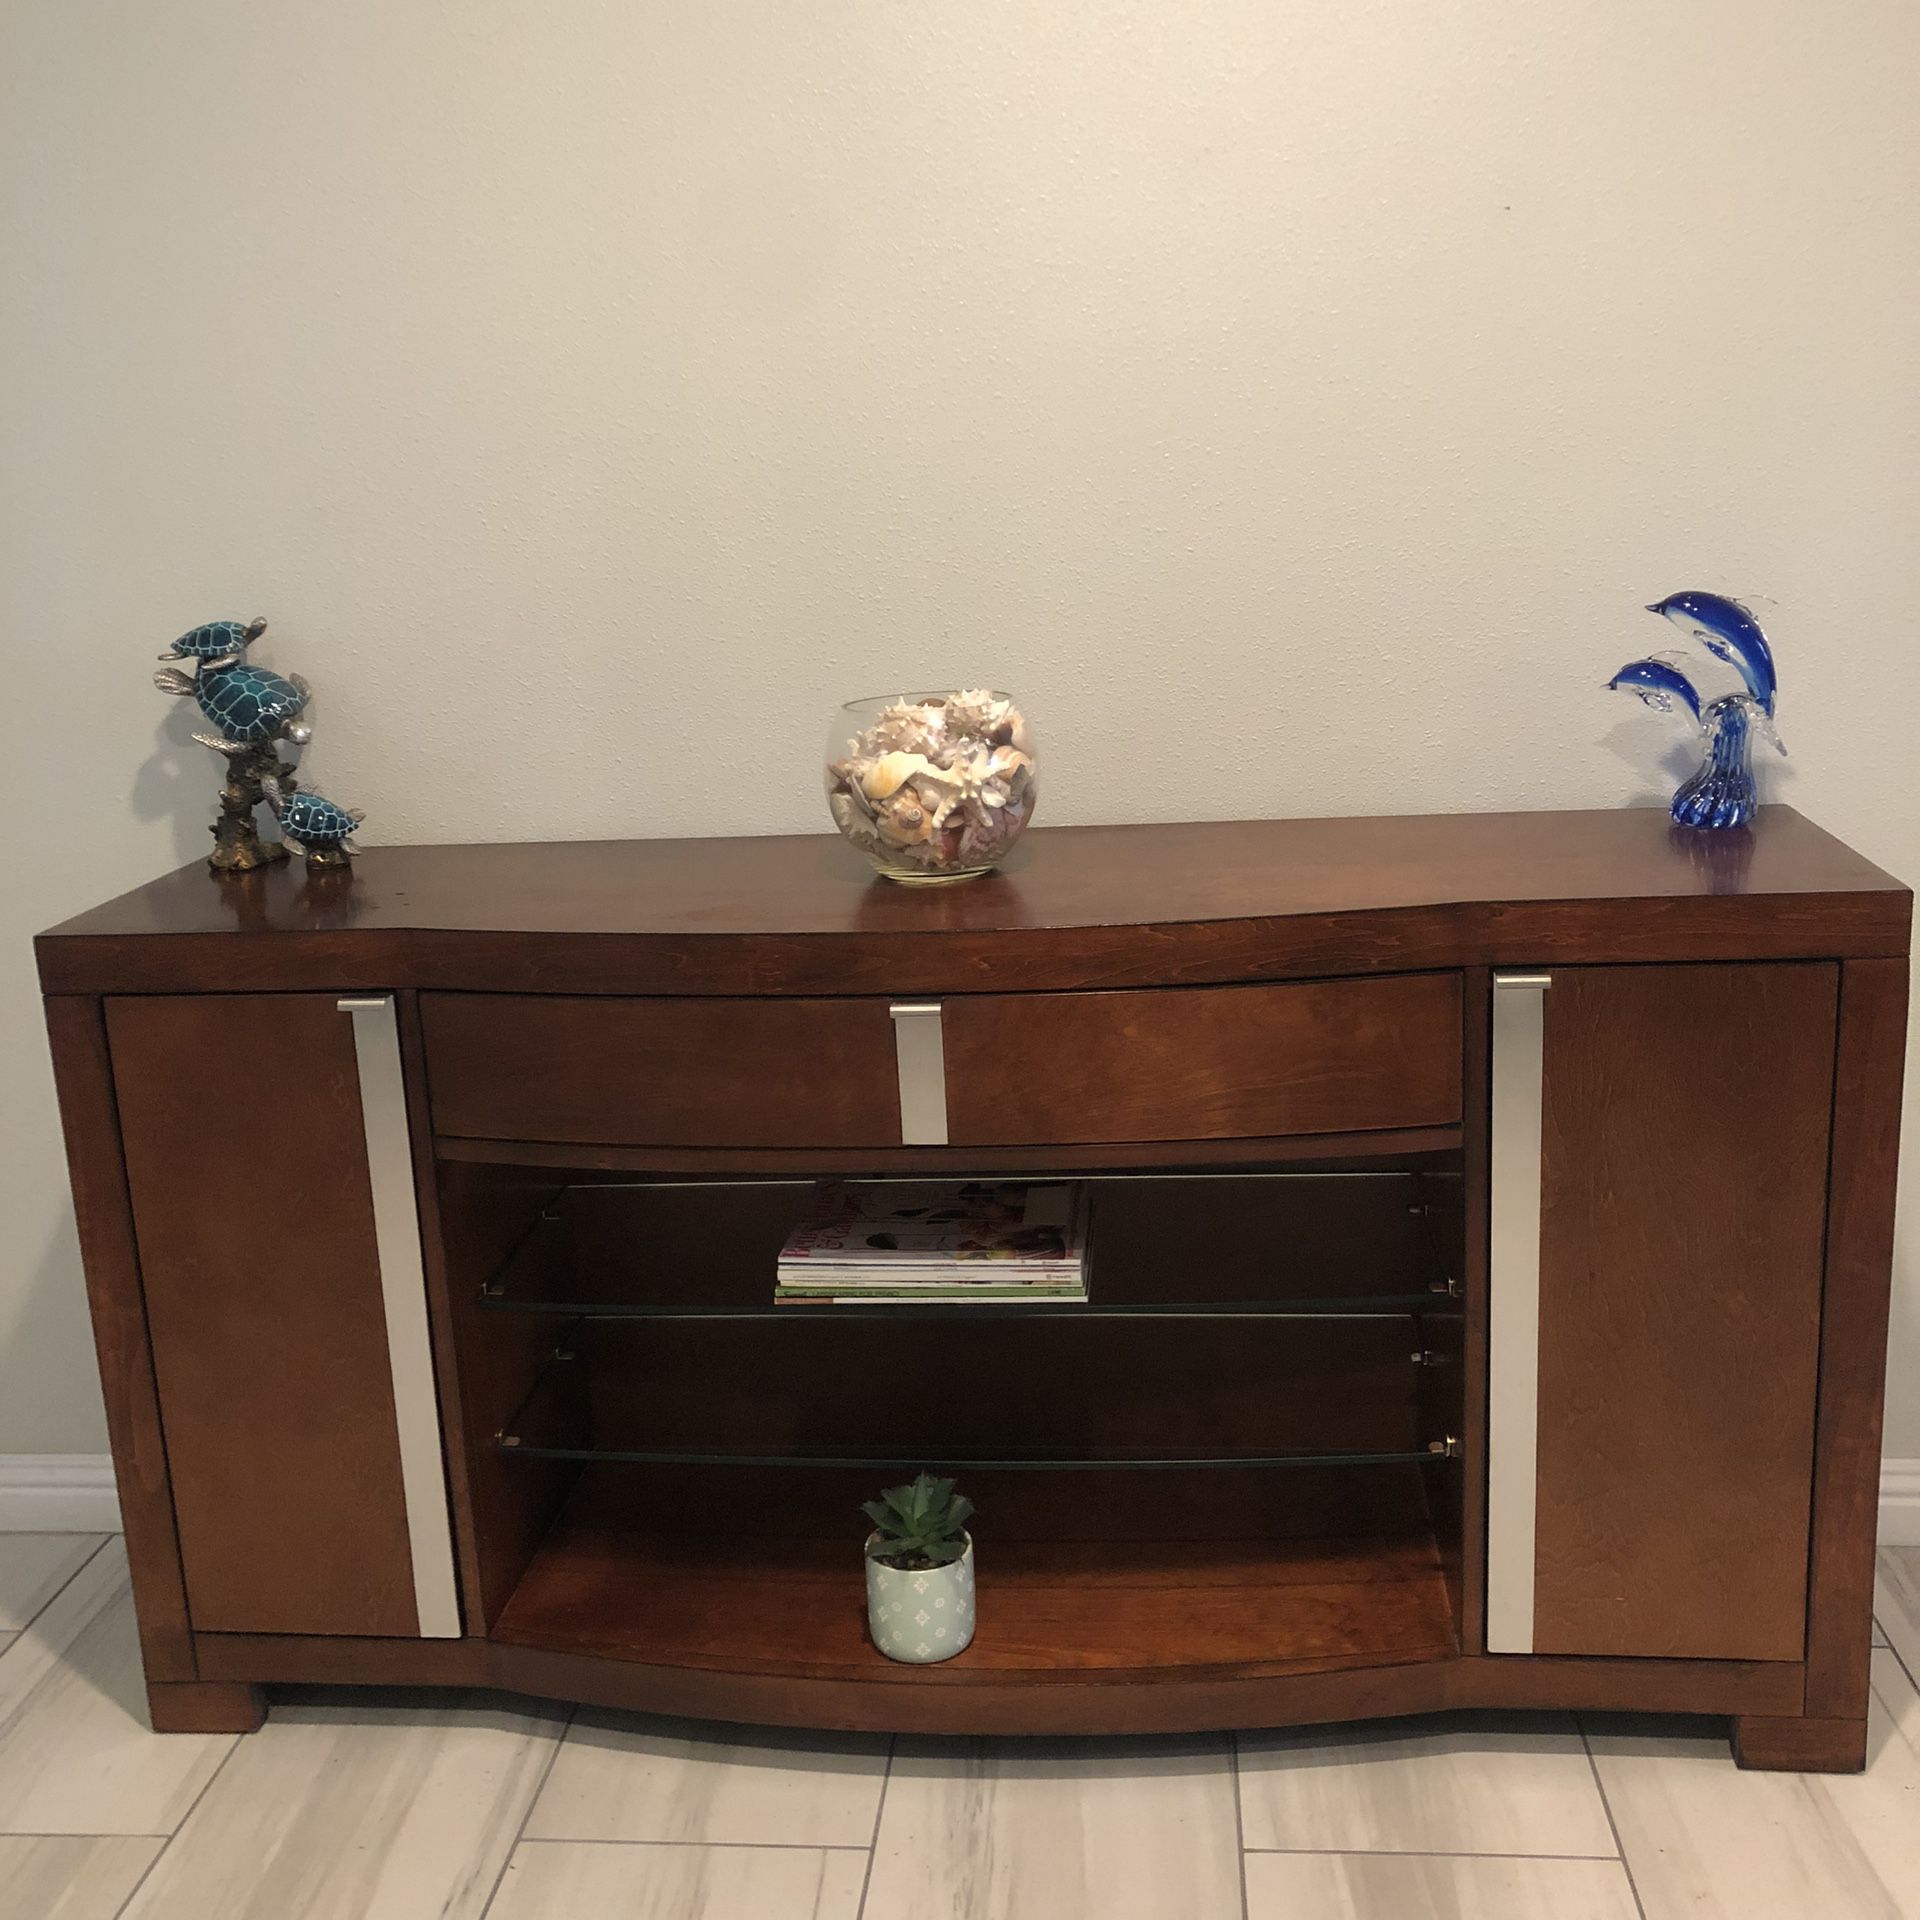 Large TV stand with floating center tick Tempered Glass Shelves. Built w/2 doors and 1 drawer. (Vanity or Dresser) Design by Ashley